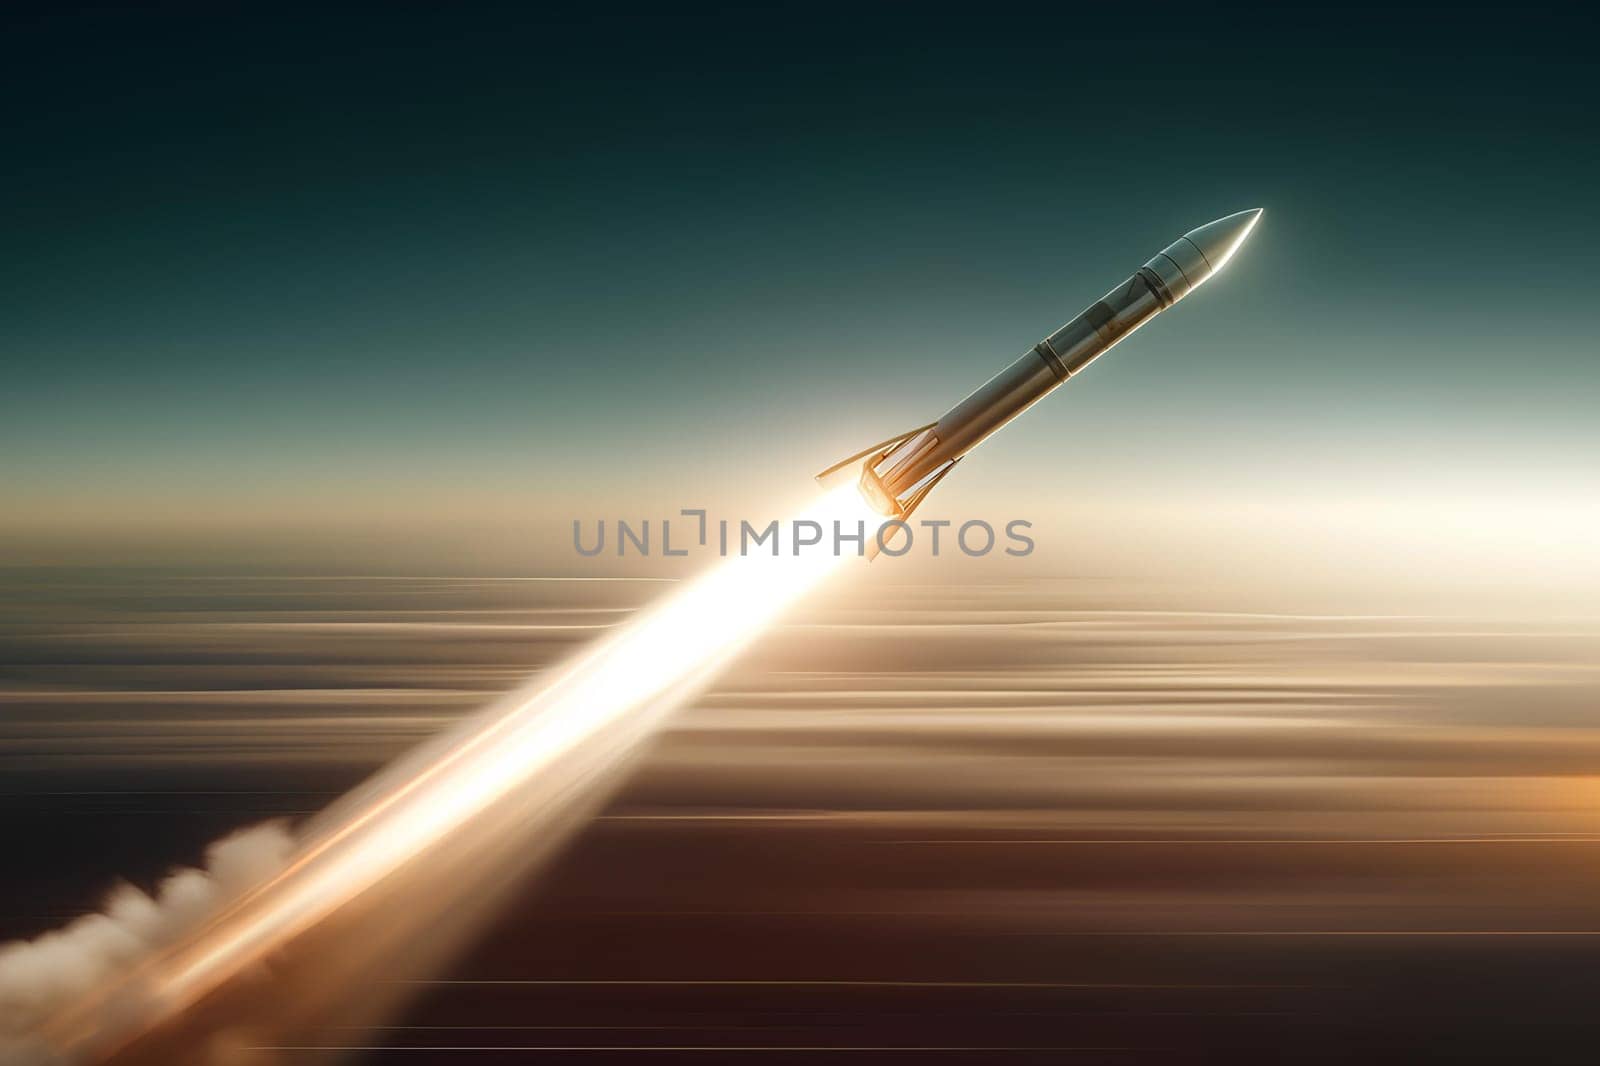 a flying rocket with a bright trail and a plume of exhaust gases showing its path.